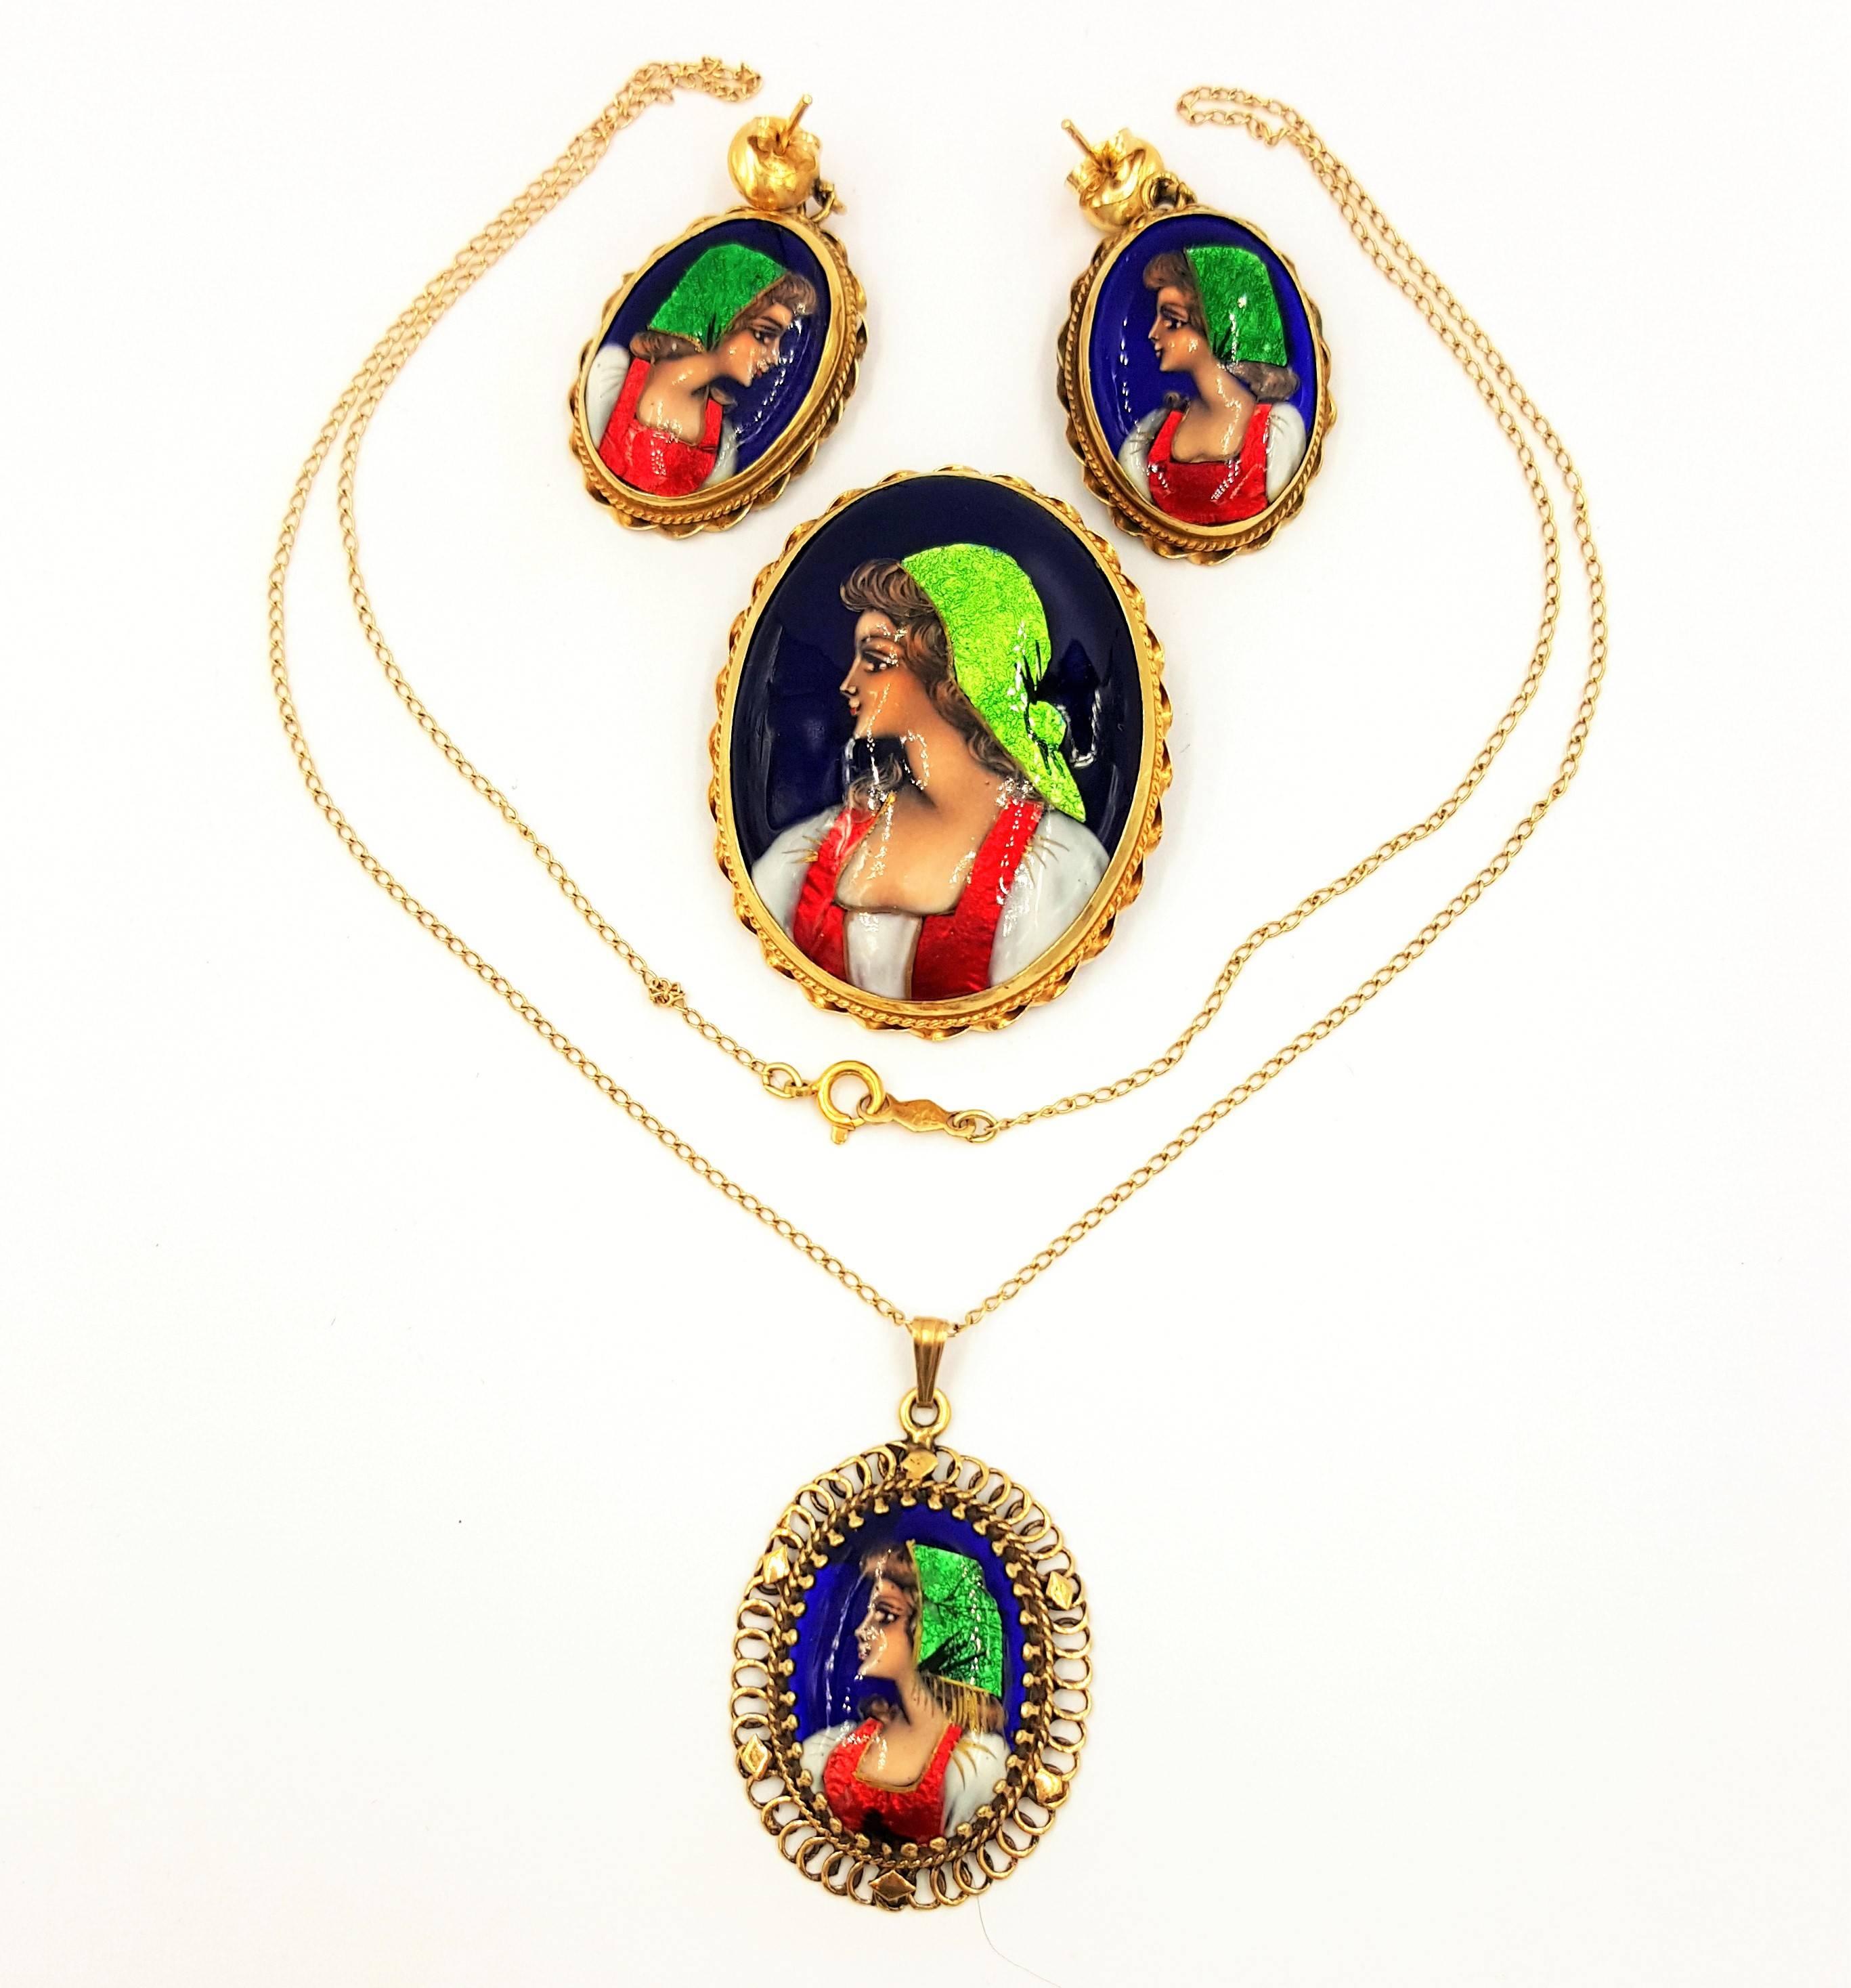 This gorgeous Circa 1950's Revival Cameo Hand Painted Mini Portrait Suite in Perfect Condition Made in France includes one brooch in perfectly new condition, with matching necklace, and earrings. This is an absolutely stunning set and carries a